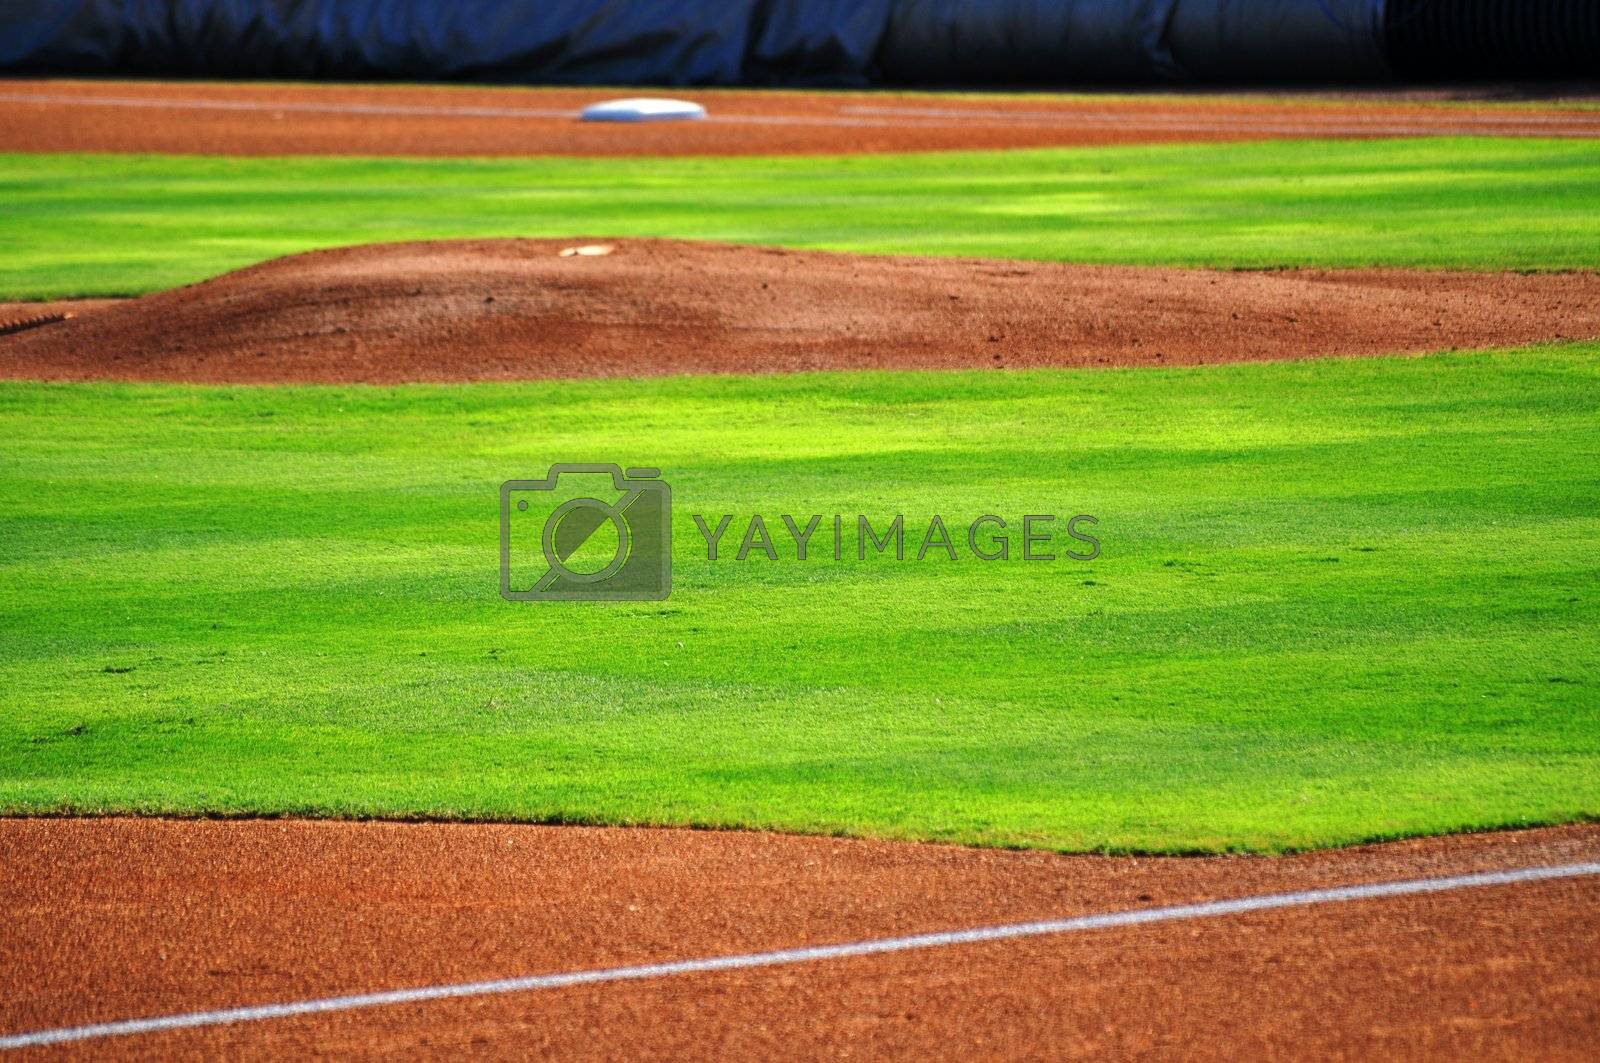 Royalty free image of Baseball pitchers mound by RefocusPhoto